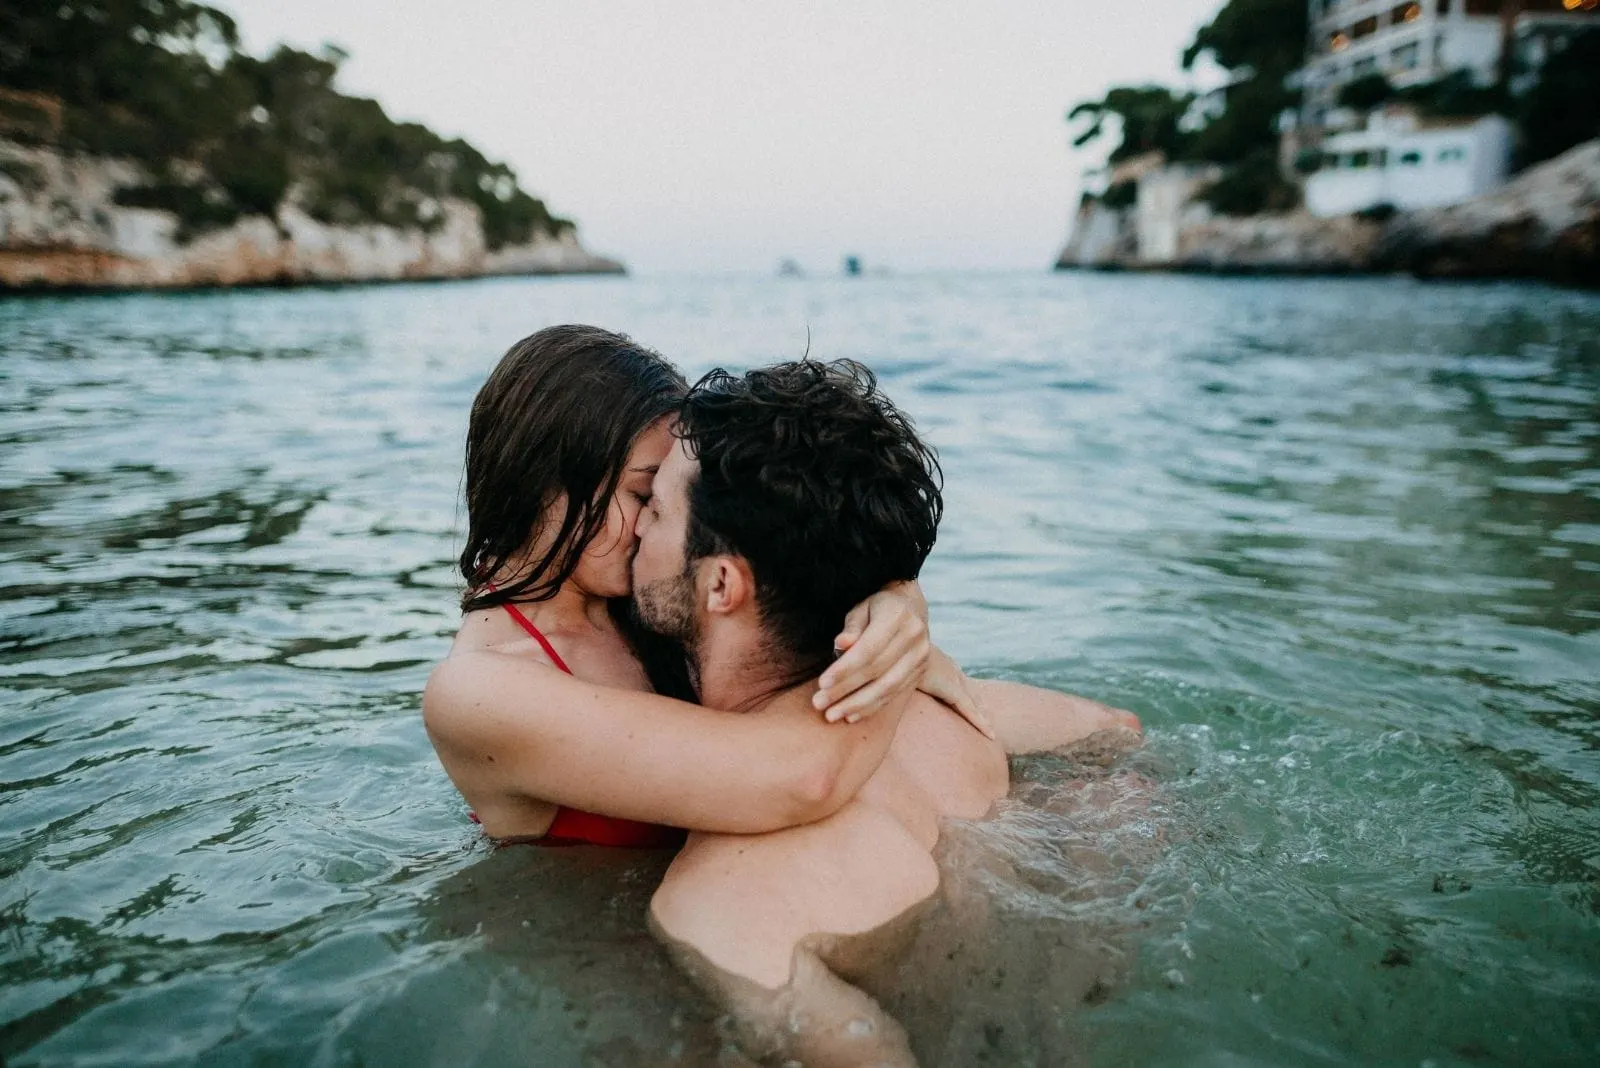 couple in the water kissing passionately wearing swimwear